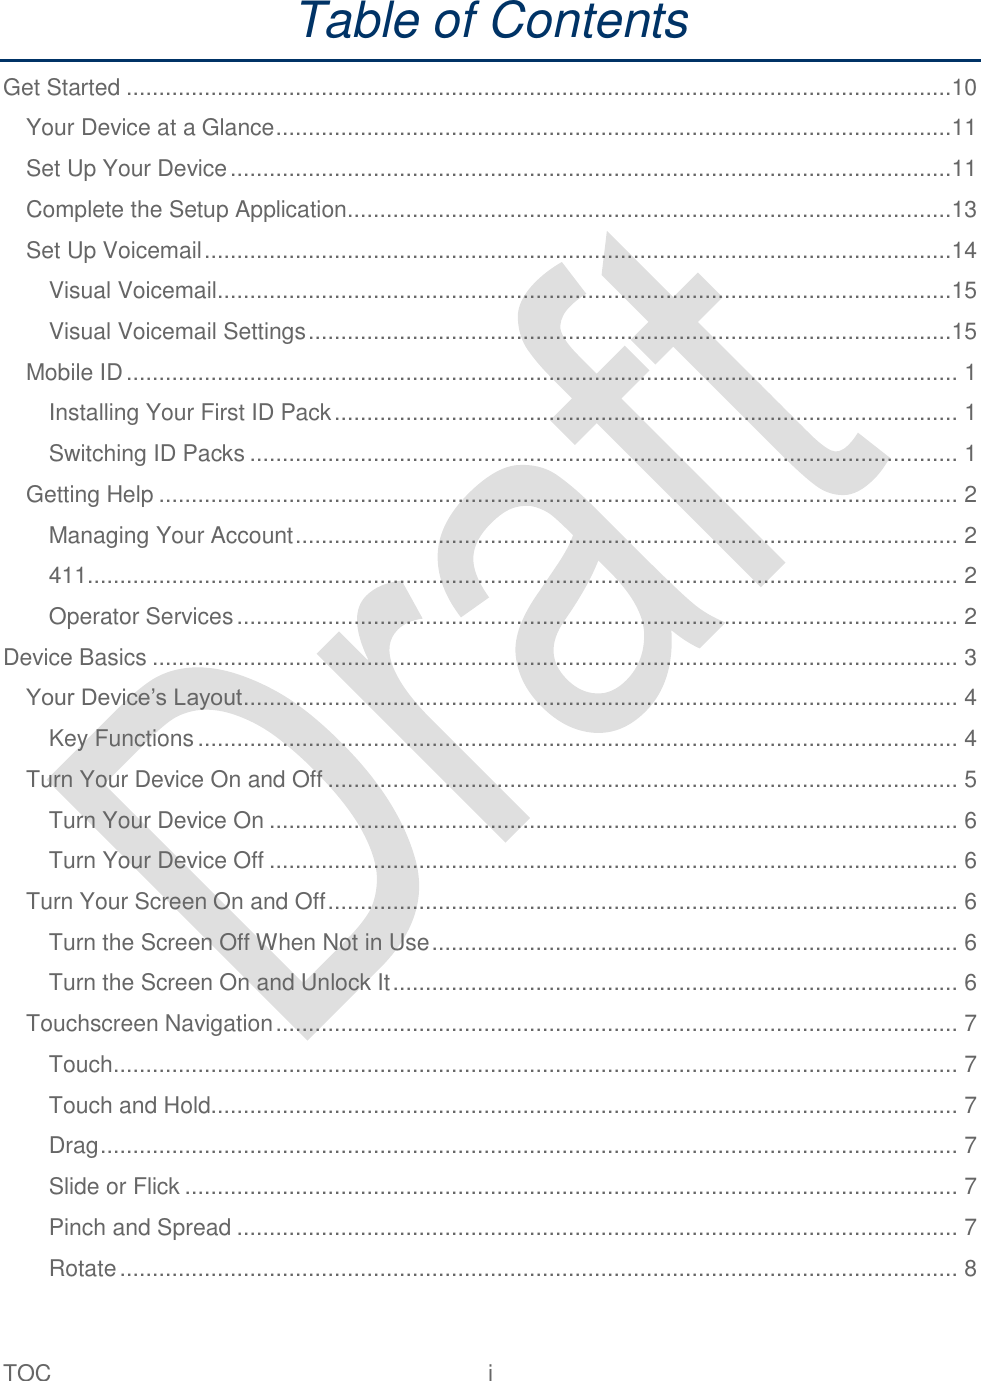  TOC  i   Table of Contents Get Started ...............................................................................................................................10 Your Device at a Glance ........................................................................................................11 Set Up Your Device ...............................................................................................................11 Complete the Setup Application.............................................................................................13 Set Up Voicemail ...................................................................................................................14 Visual Voicemail.................................................................................................................15 Visual Voicemail Settings ...................................................................................................15 Mobile ID ................................................................................................................................ 1 Installing Your First ID Pack ................................................................................................ 1 Switching ID Packs ............................................................................................................. 1 Getting Help ........................................................................................................................... 2 Managing Your Account ...................................................................................................... 2 411...................................................................................................................................... 2 Operator Services ............................................................................................................... 2 Device Basics ............................................................................................................................ 3 Your Device‟s Layout .............................................................................................................. 4 Key Functions ..................................................................................................................... 4 Turn Your Device On and Off ................................................................................................. 5 Turn Your Device On .......................................................................................................... 6 Turn Your Device Off .......................................................................................................... 6 Turn Your Screen On and Off ................................................................................................. 6 Turn the Screen Off When Not in Use ................................................................................. 6 Turn the Screen On and Unlock It ....................................................................................... 6 Touchscreen Navigation ......................................................................................................... 7 Touch .................................................................................................................................. 7 Touch and Hold................................................................................................................... 7 Drag .................................................................................................................................... 7 Slide or Flick ....................................................................................................................... 7 Pinch and Spread ............................................................................................................... 7 Rotate ................................................................................................................................. 8 